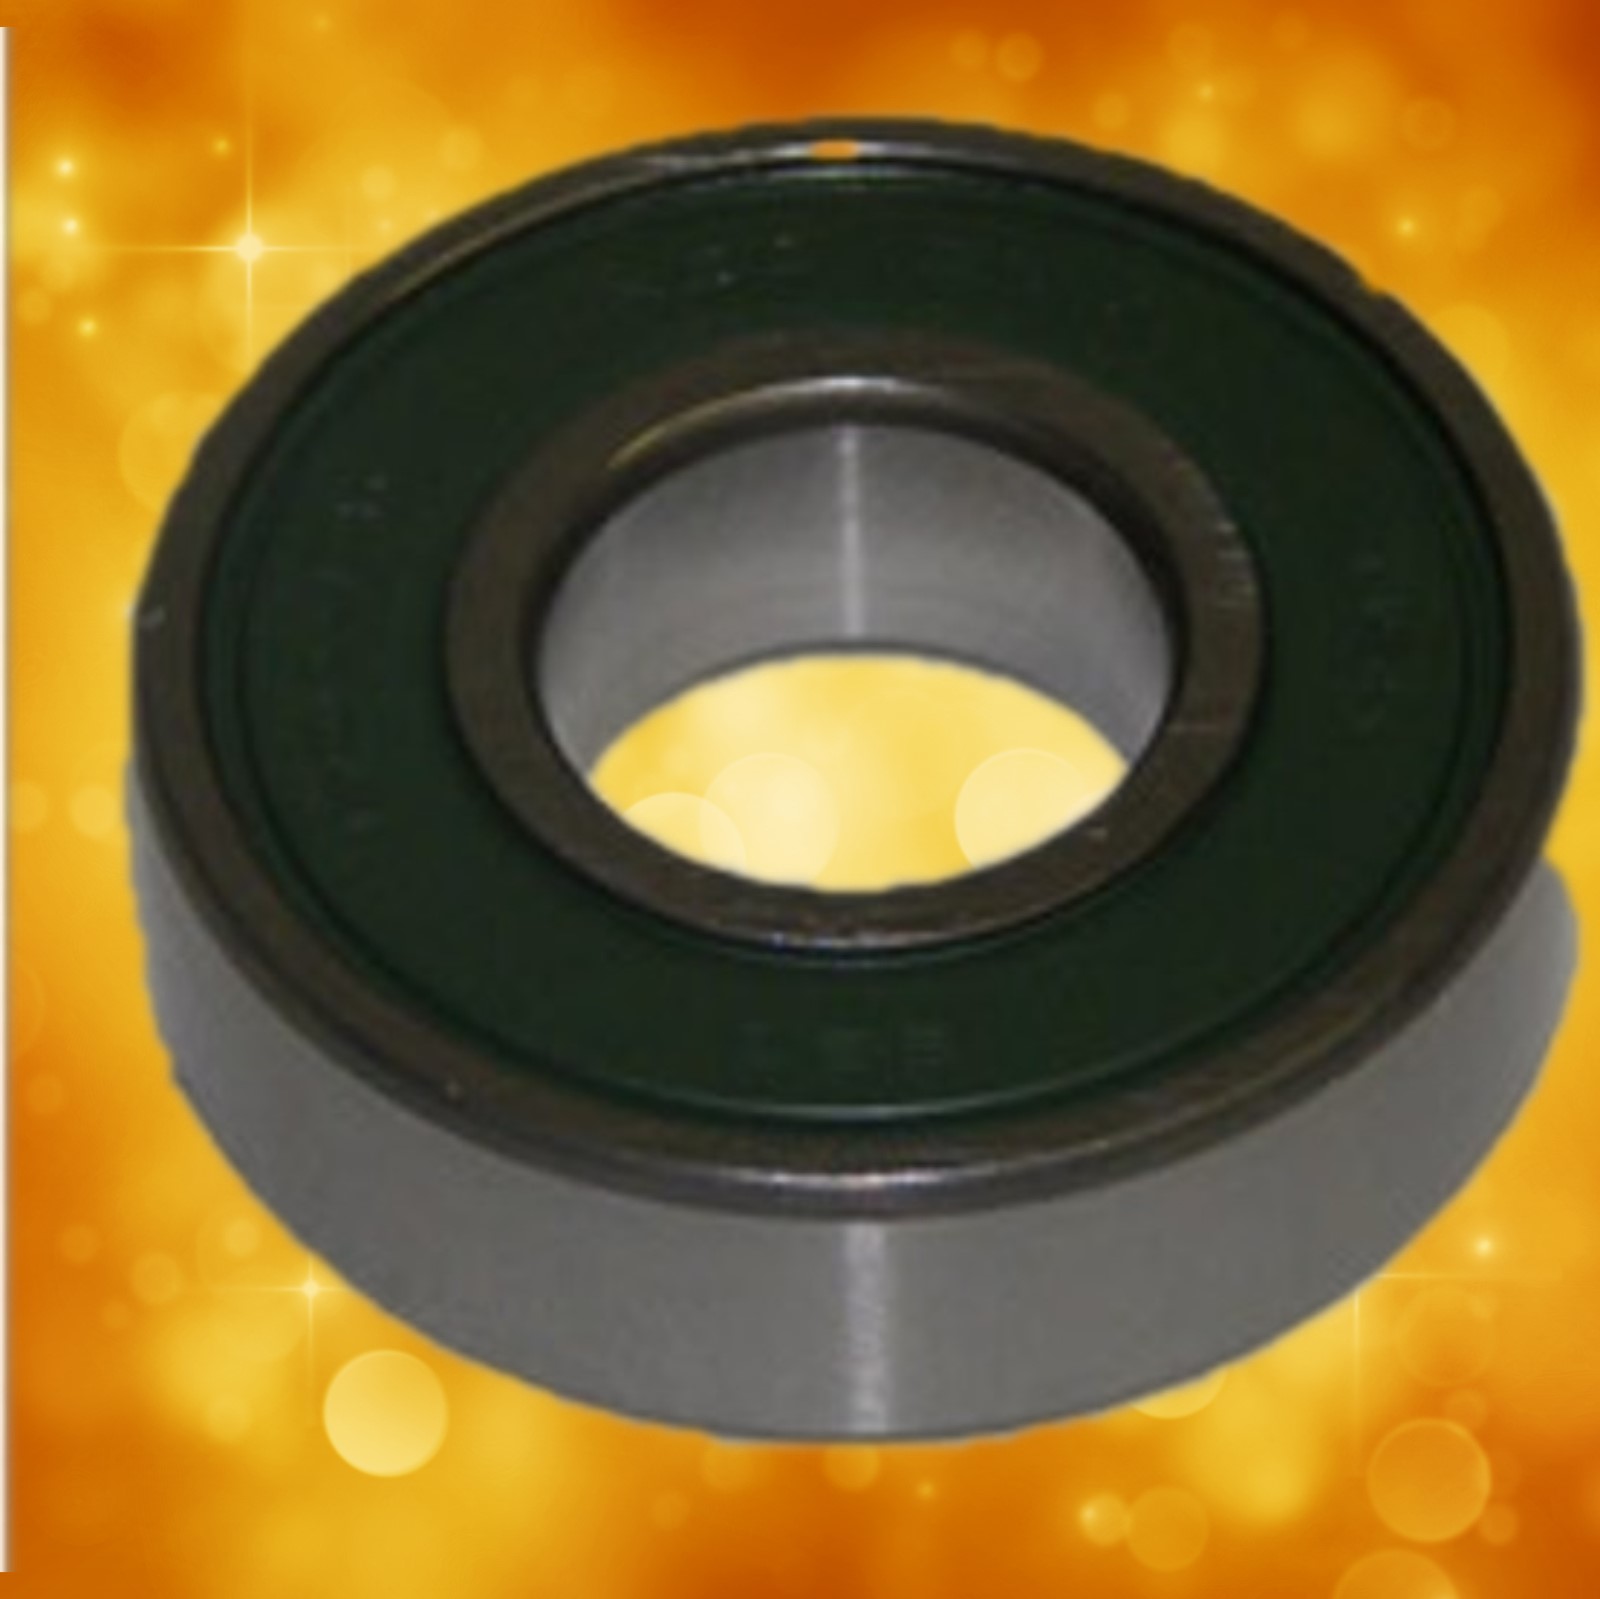 Delta Tool Part 330003-64 Delta Bearing Sub for 400-08-139-0006 and 694147   694147